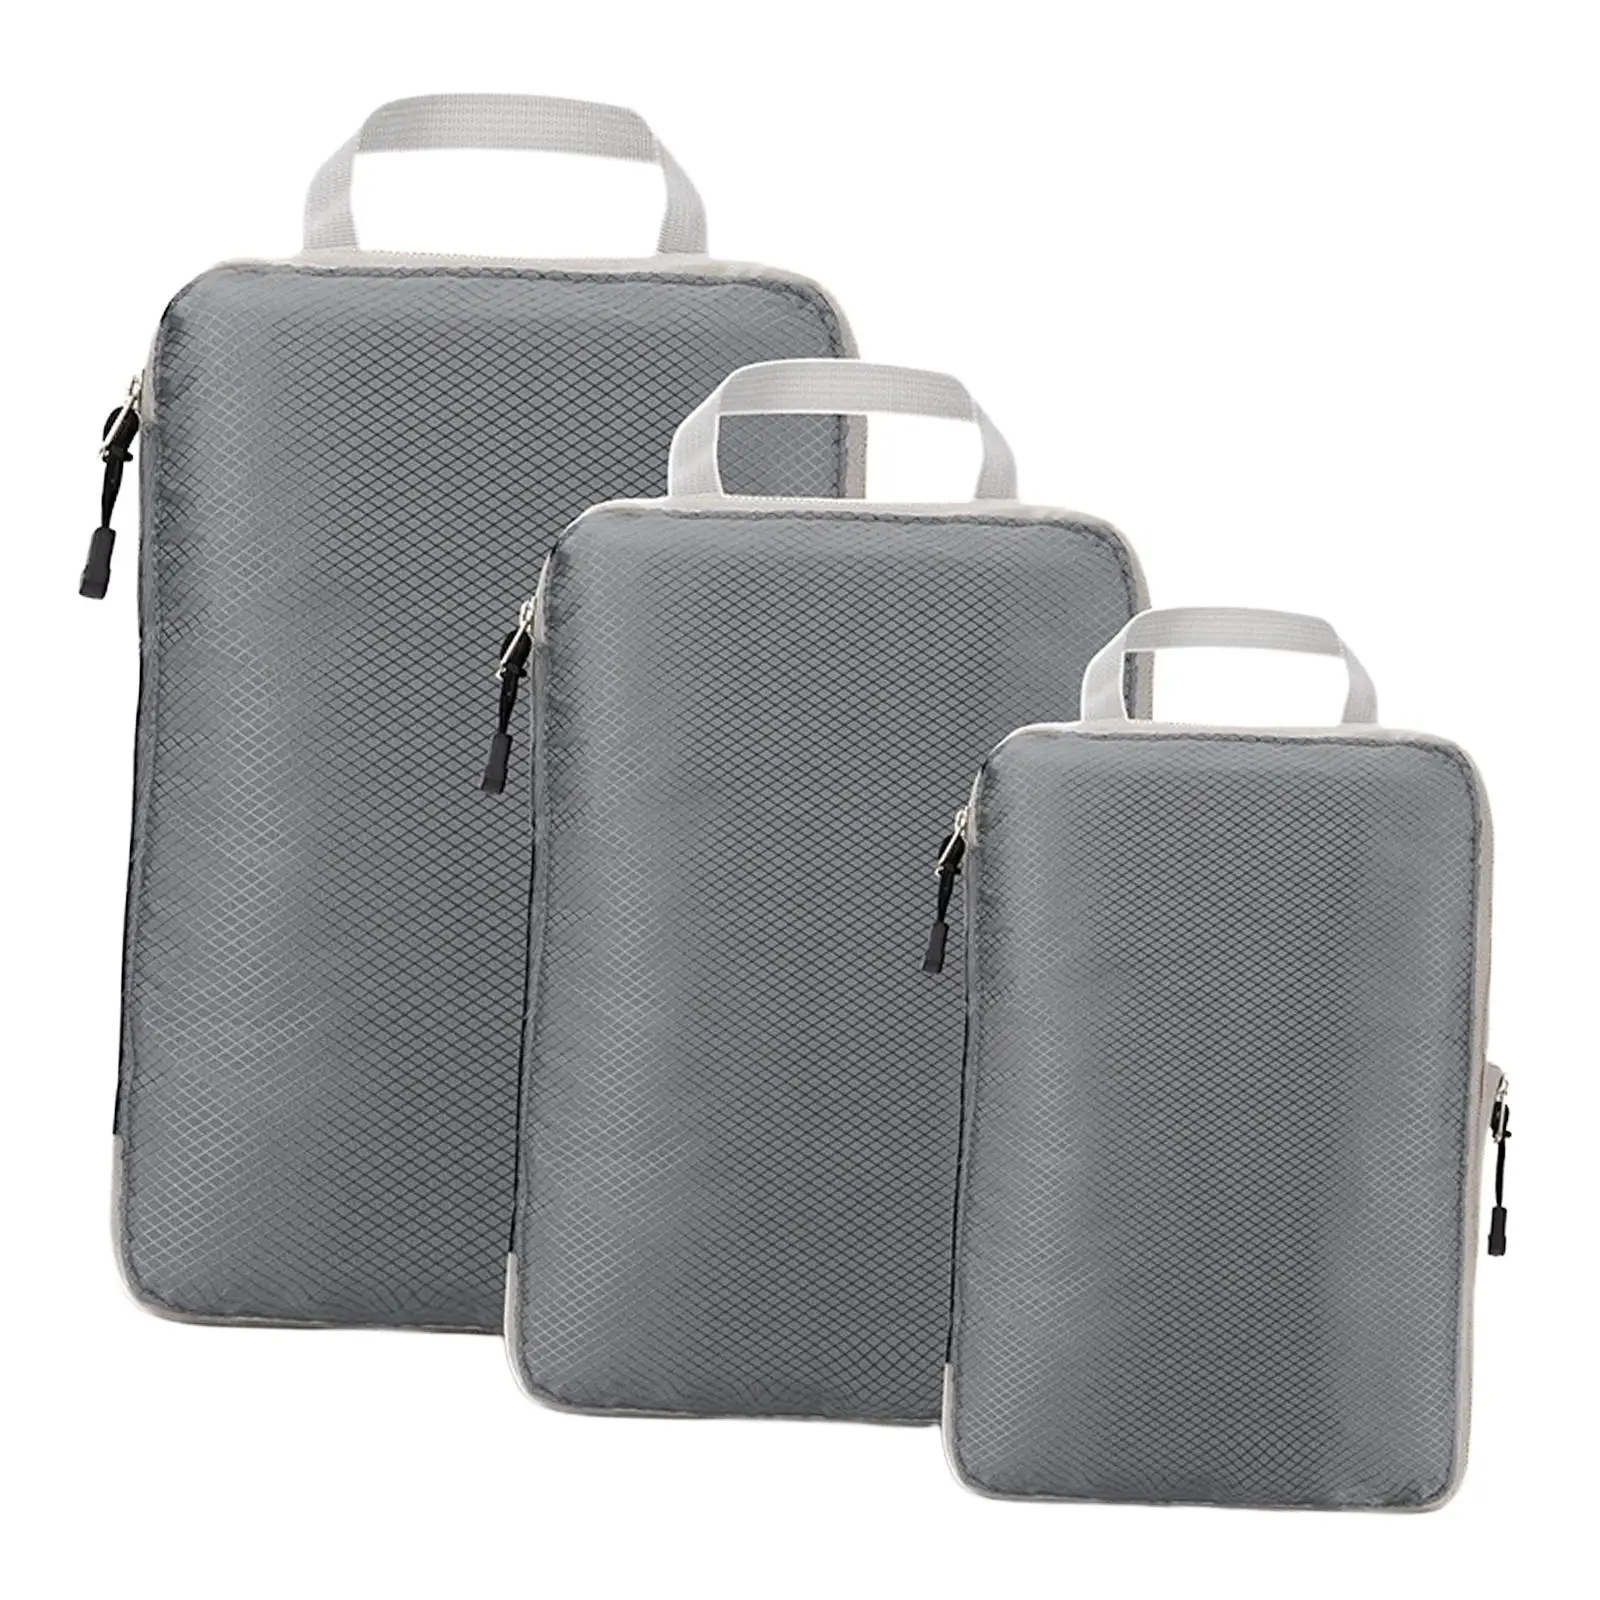 3x Travel Compressible Packing Cubes Men Women Portable Packing Bags Set